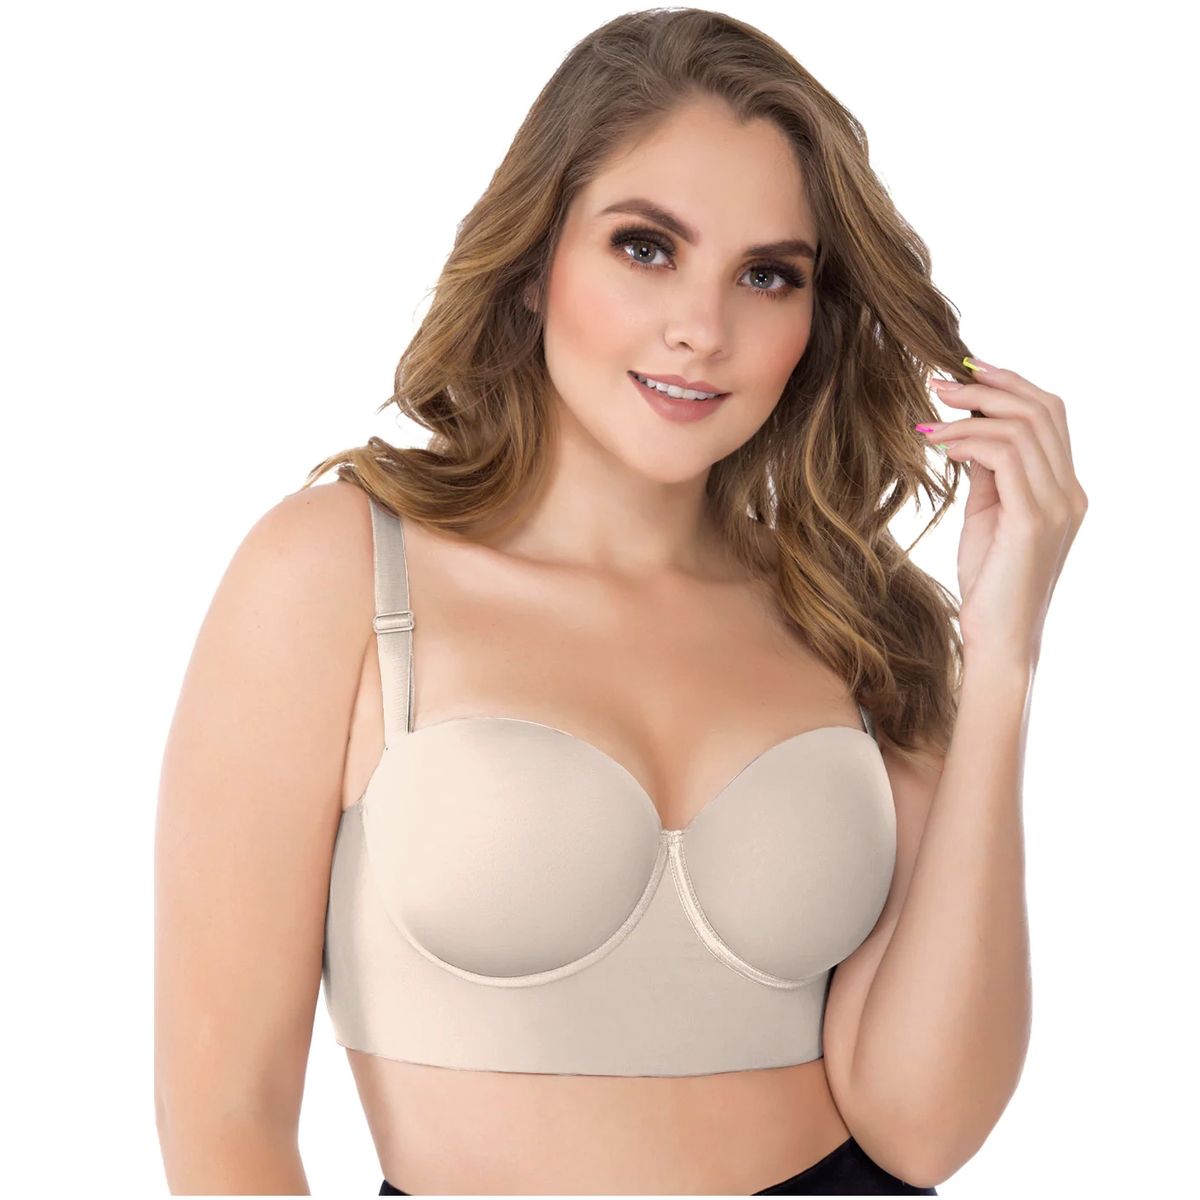 UPLADY 8034 FIRM CONTROL STRAPLESS BRA FOR WOMEN (Size: 36B/L, Color: Beige)